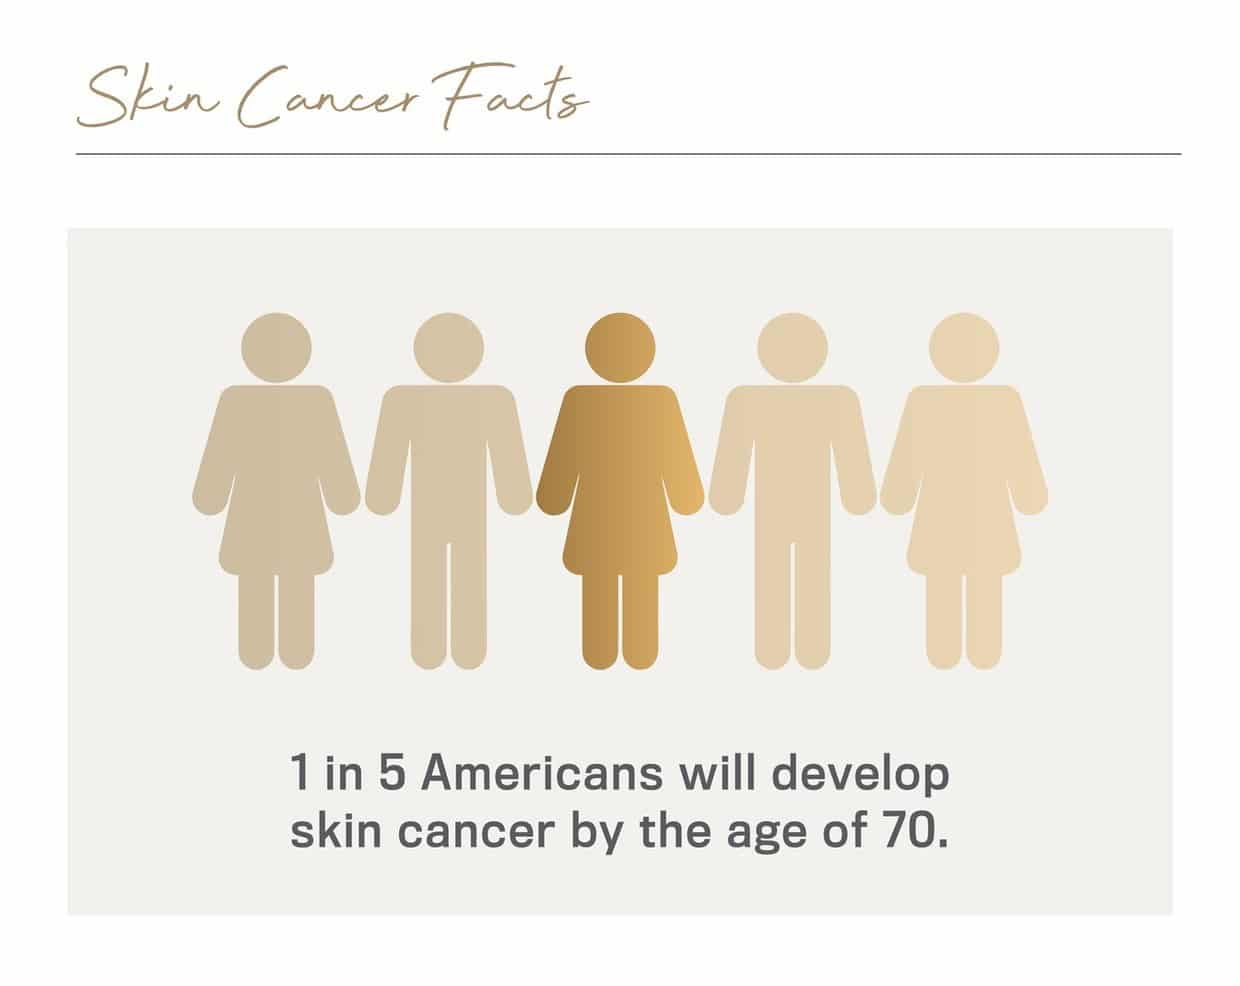 Skin Cancer Facts 1 in 5 Americans will developer skin cancer by the age of 70